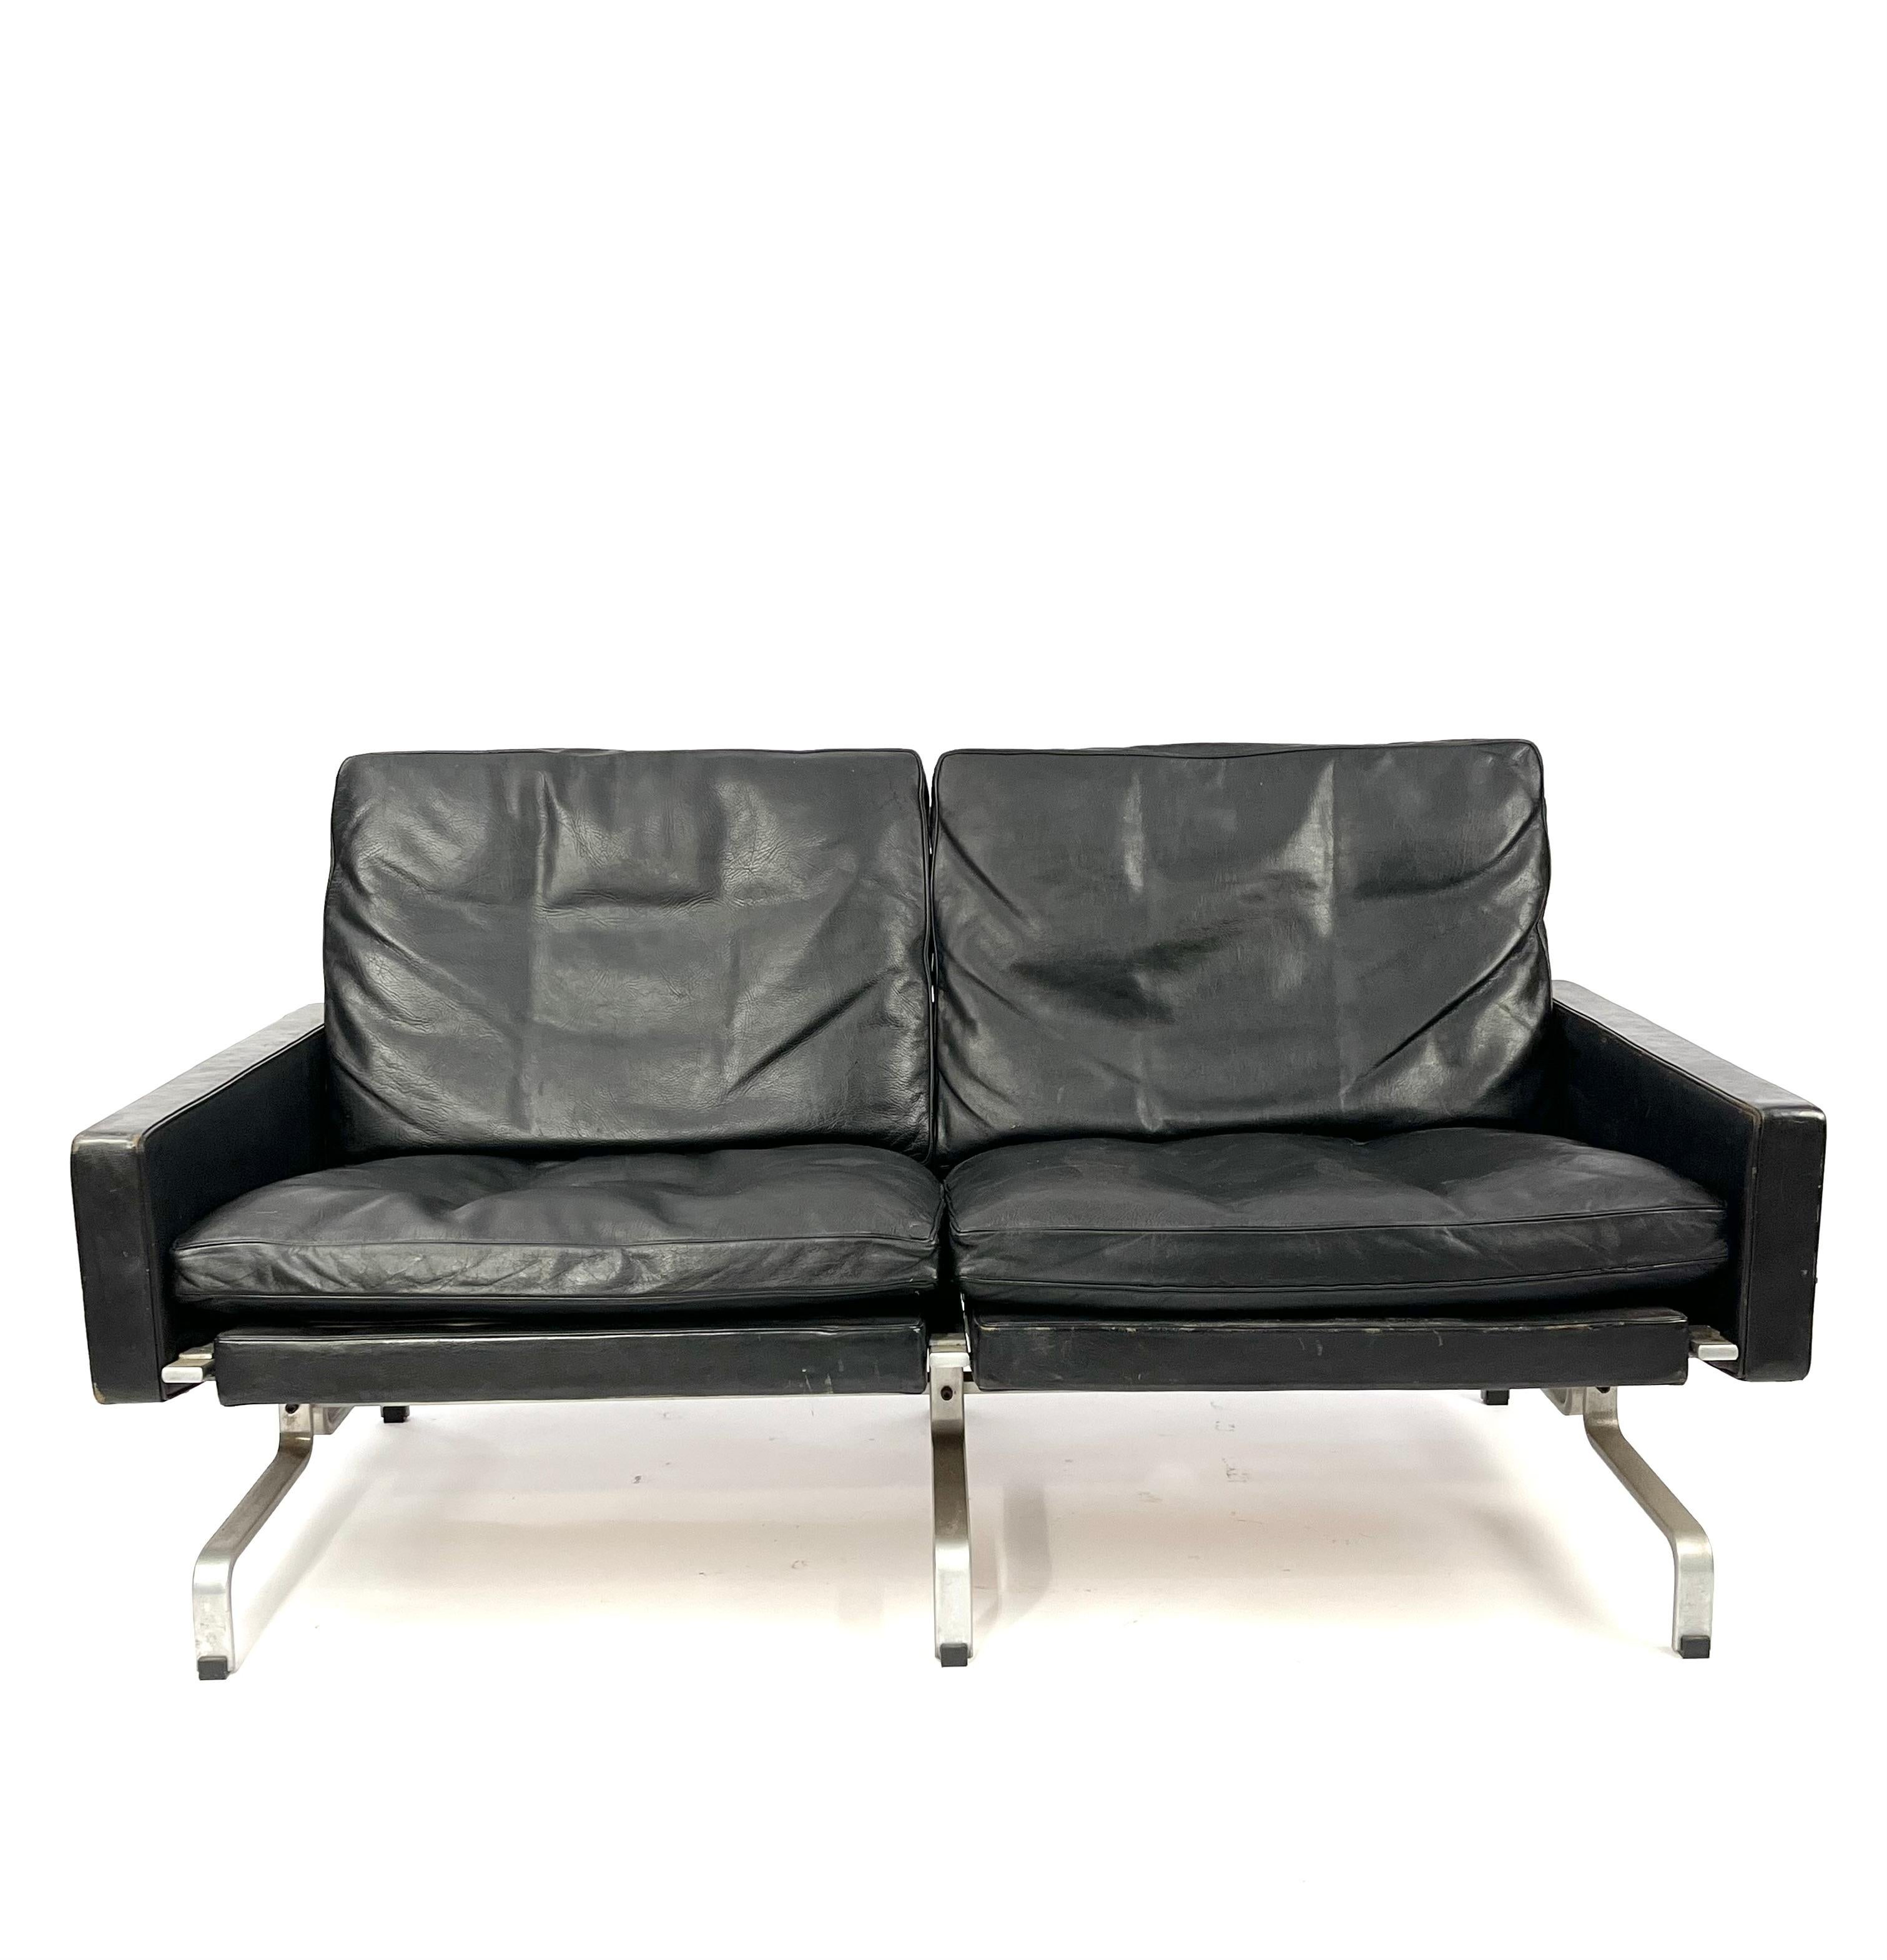 Poul Kjaerholm for E. Kold Christensen, two-seat sofa model PK 31, leather and metal, Denmark, 1960s.

Beautiful PK31 sofa in patinated black leather by Poul Kjaerholm for E. Kold Christensen. 
This sofa features Poul Kjaerholm’s ability to work